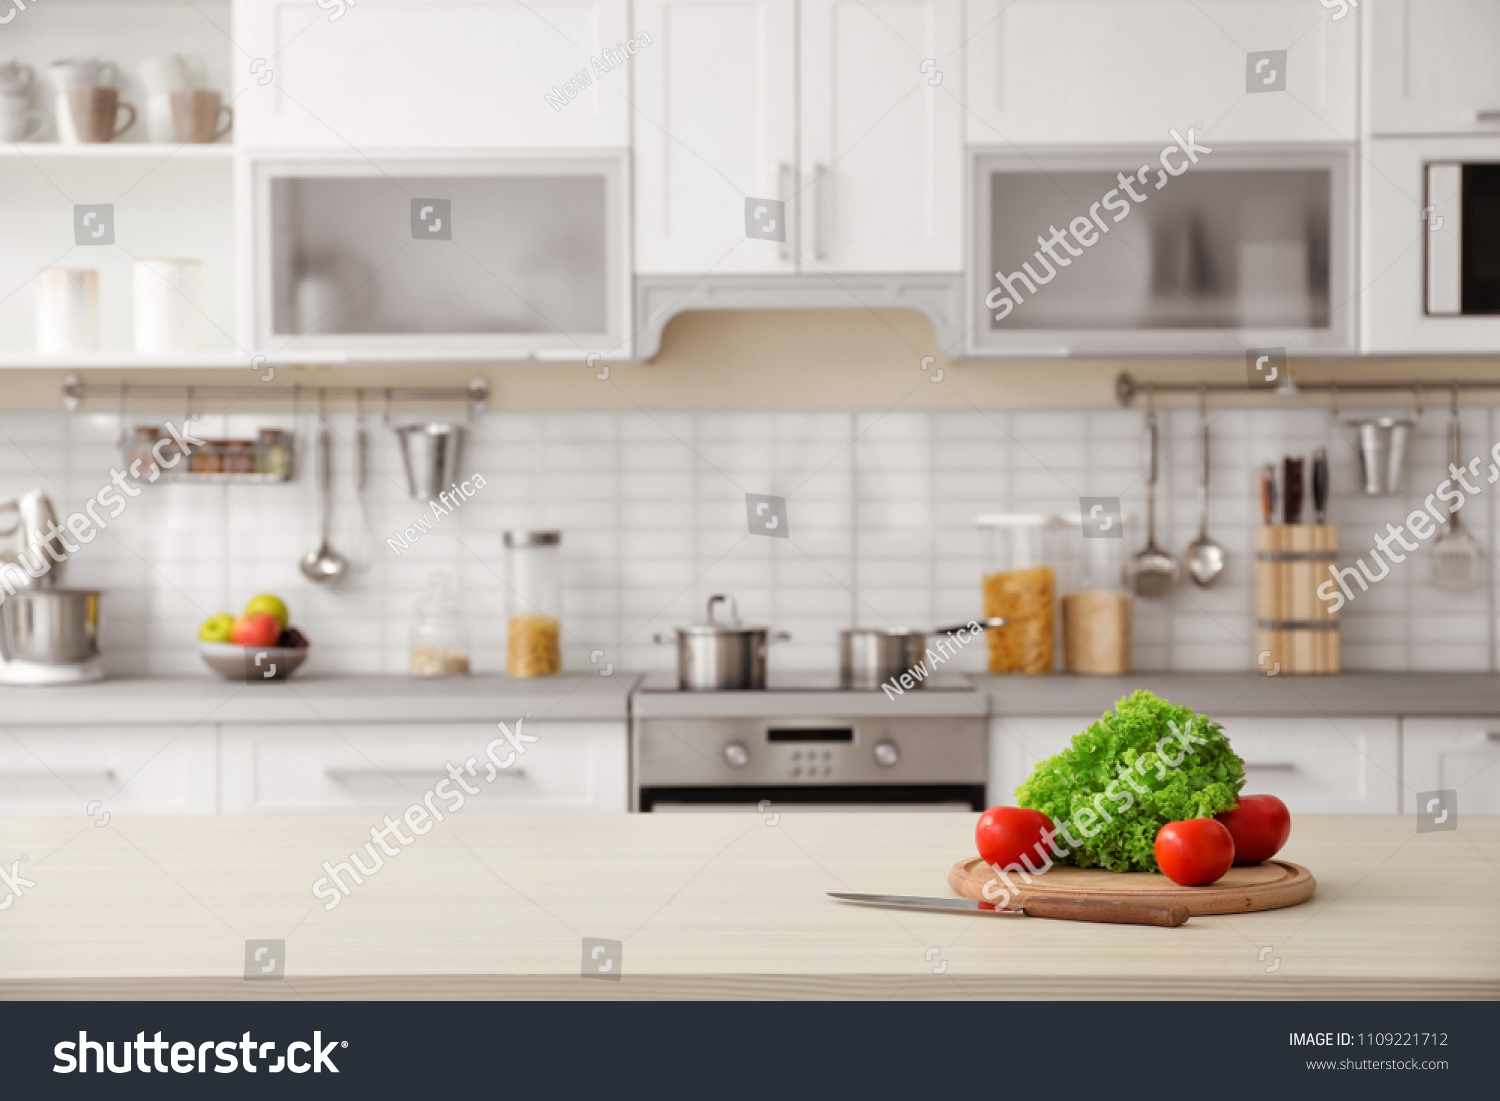 Products and blurred view of kitchen interior on background #1109221712